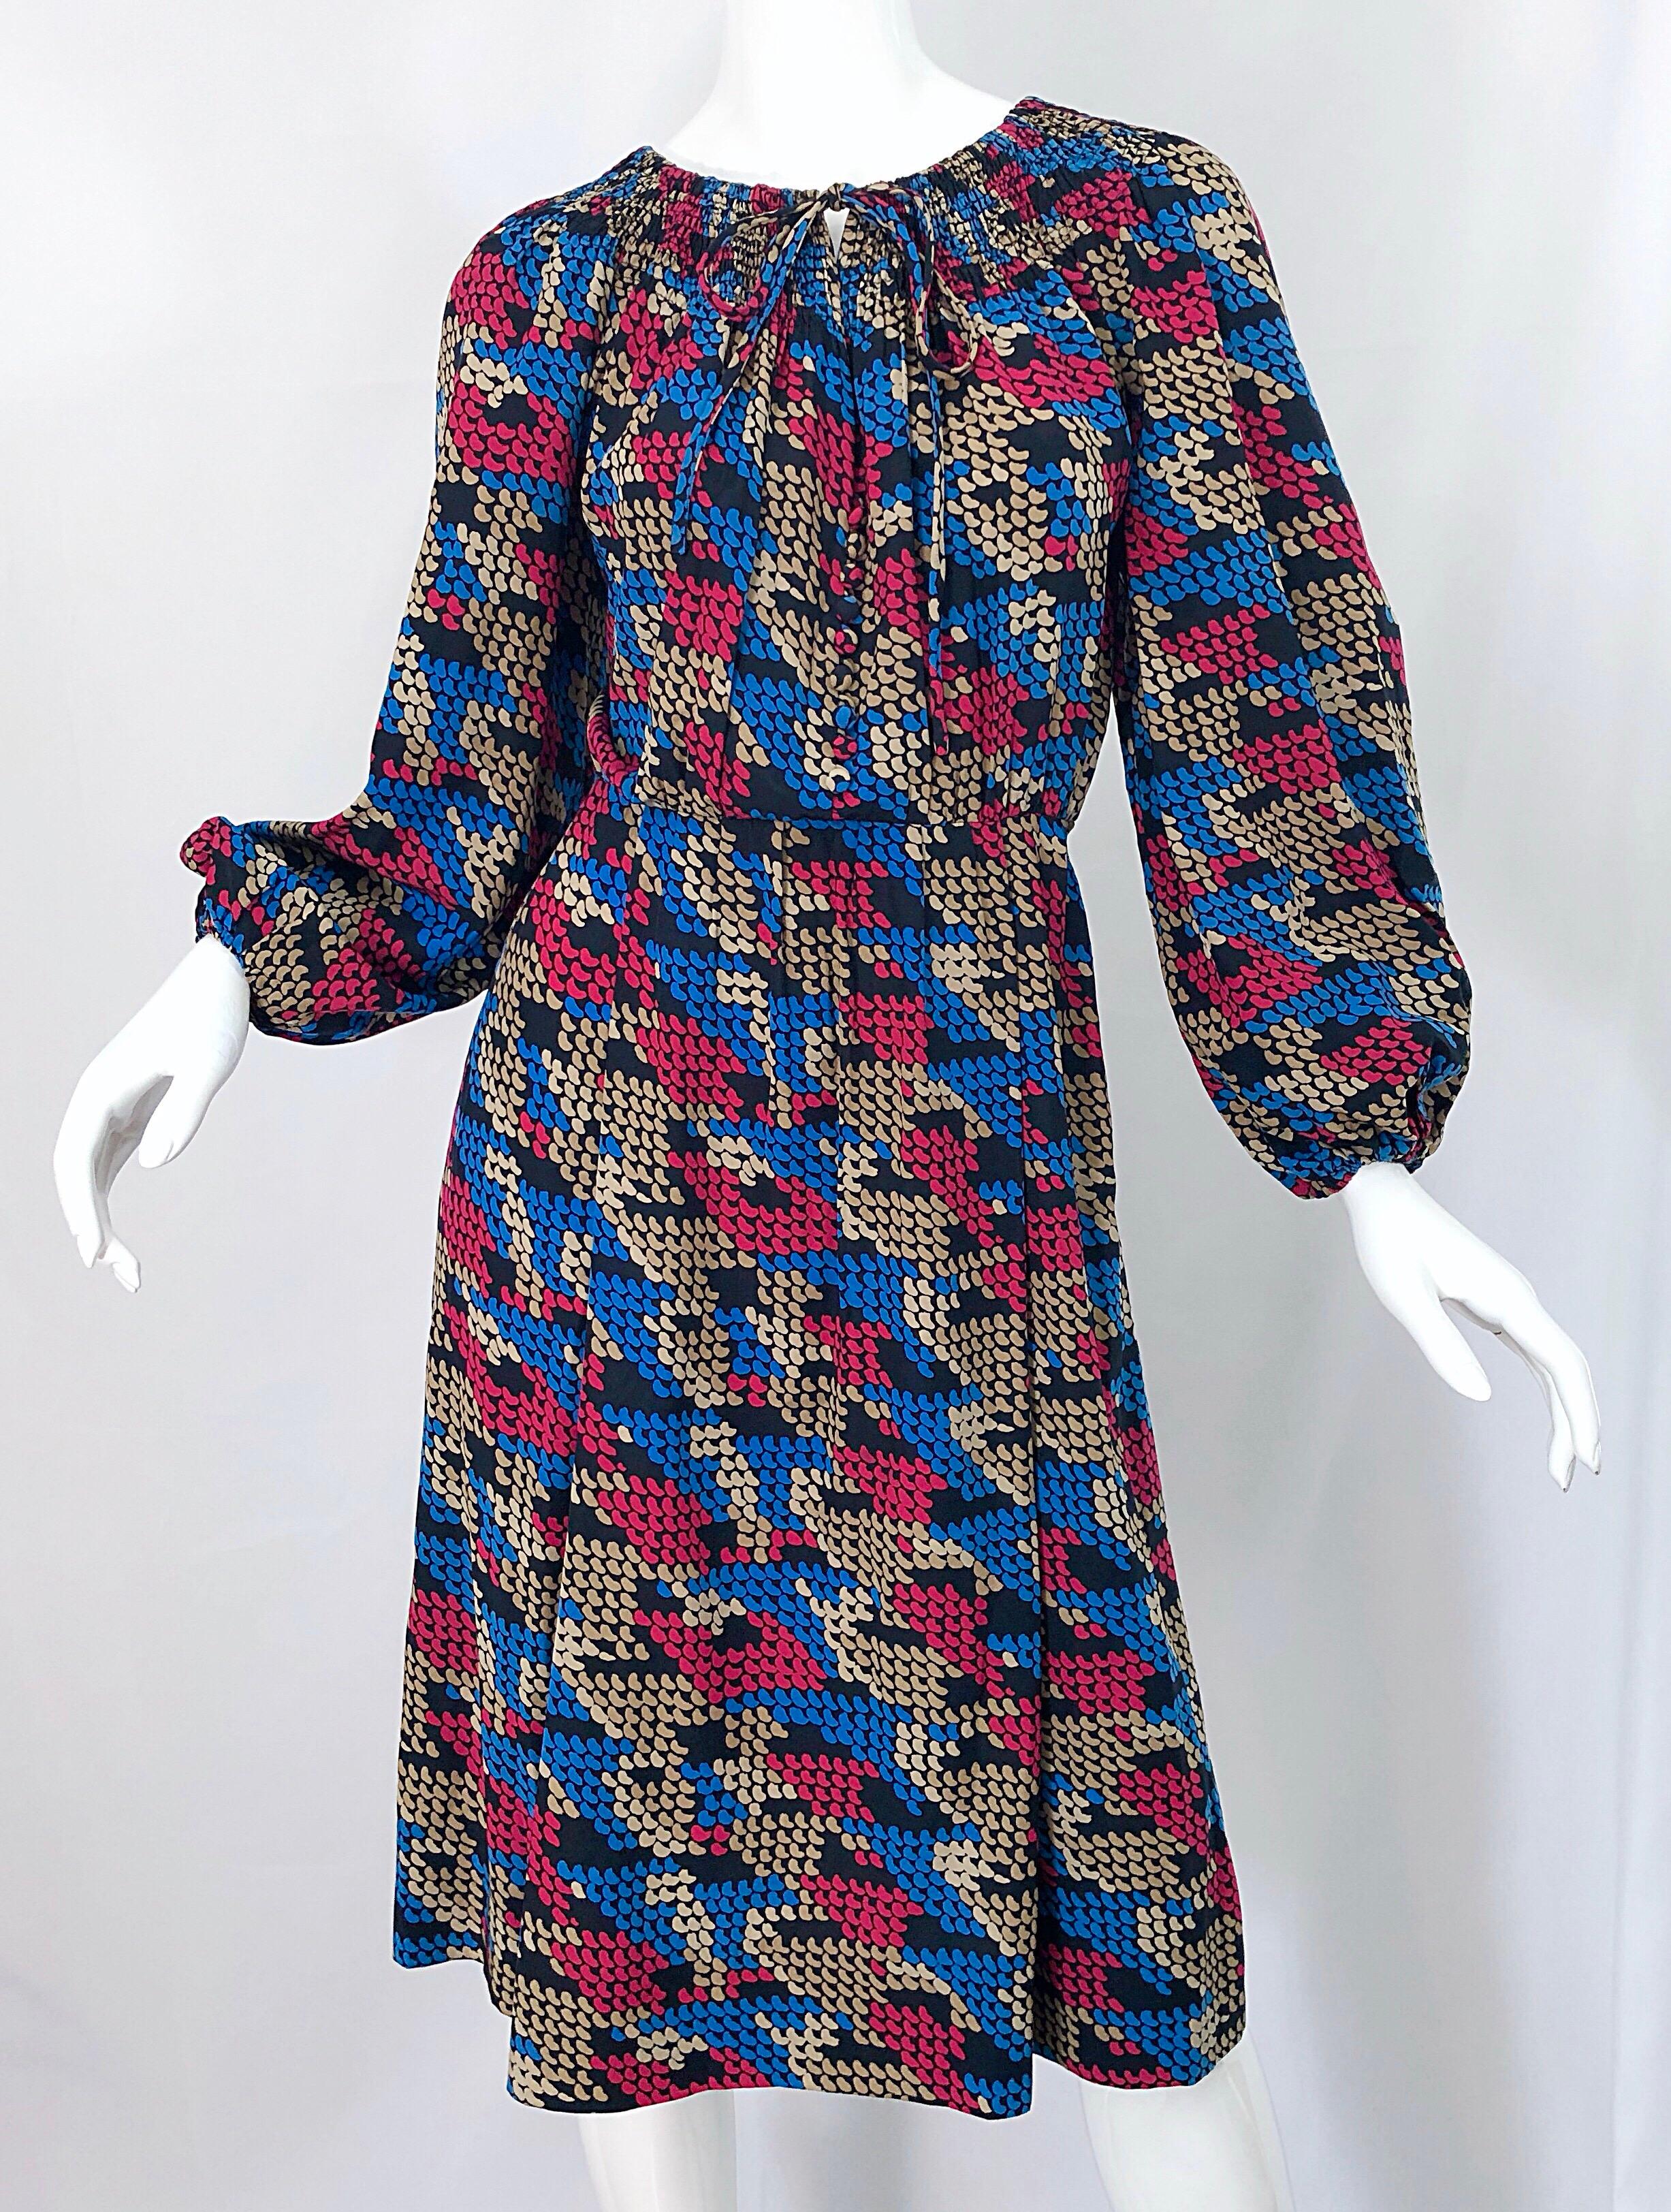 Givenchy Haute Couture 1970s Exaggerated Houndstooth Bishop Sleeve Vintage Dress For Sale 10